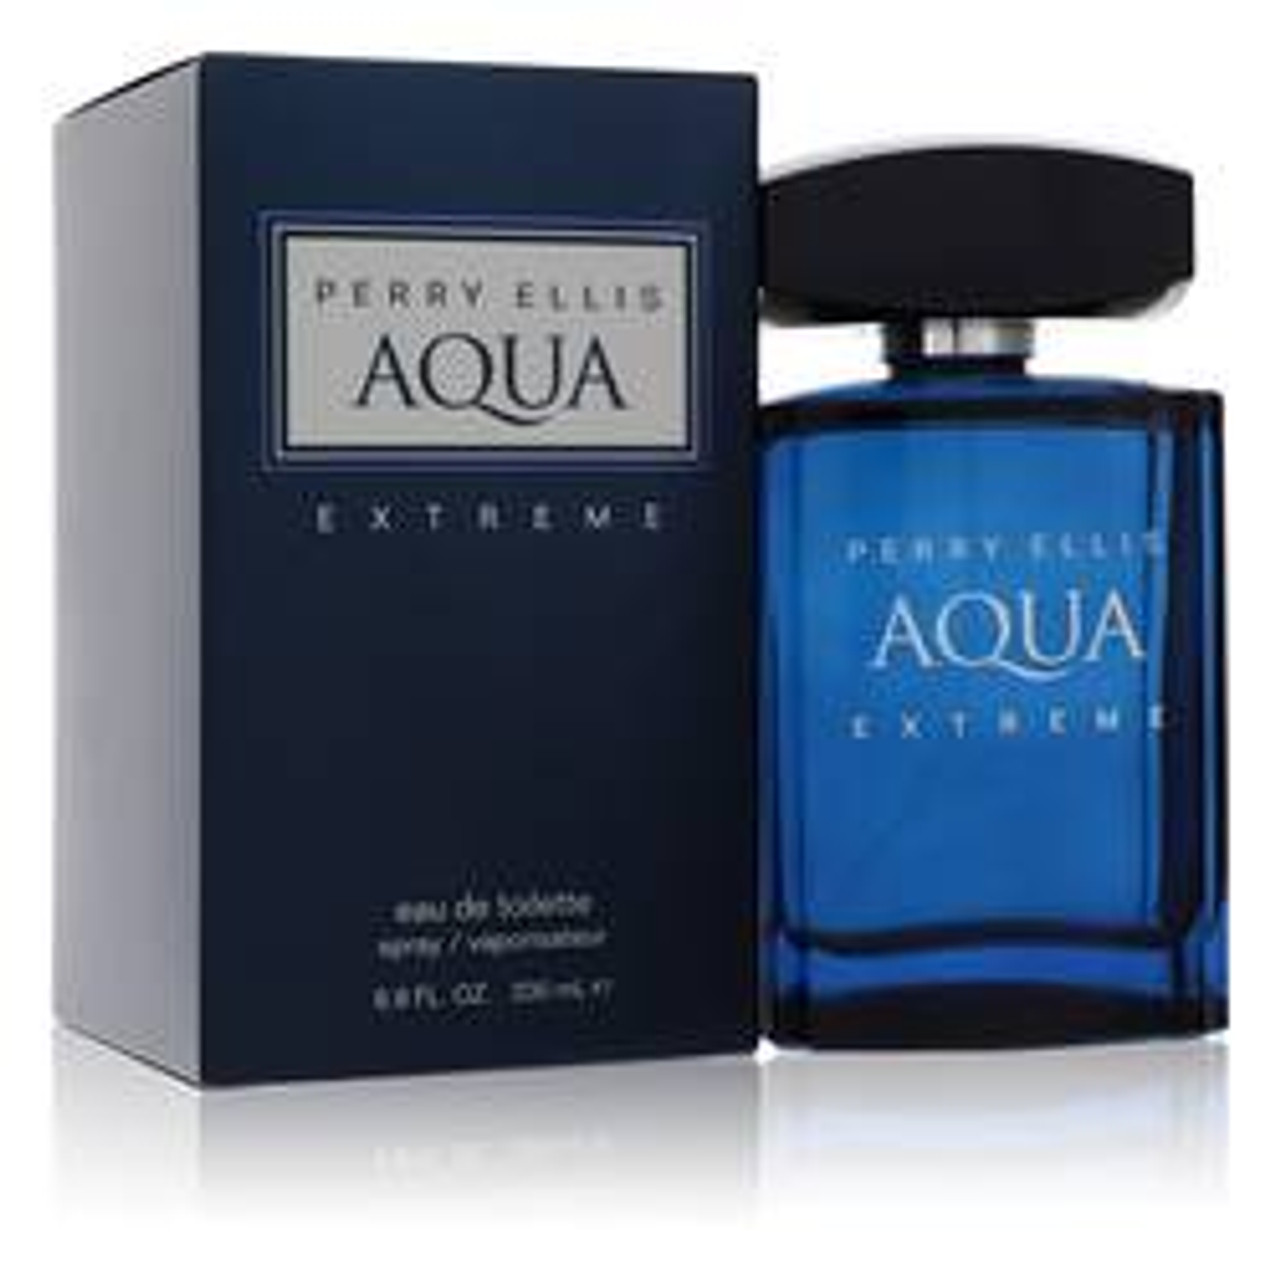 Perry Ellis Aqua Extreme Cologne By Perry Ellis Eau De Toilette Spray 6.8 oz for Men - [From 88.00 - Choose pk Qty ] - *Ships from Miami